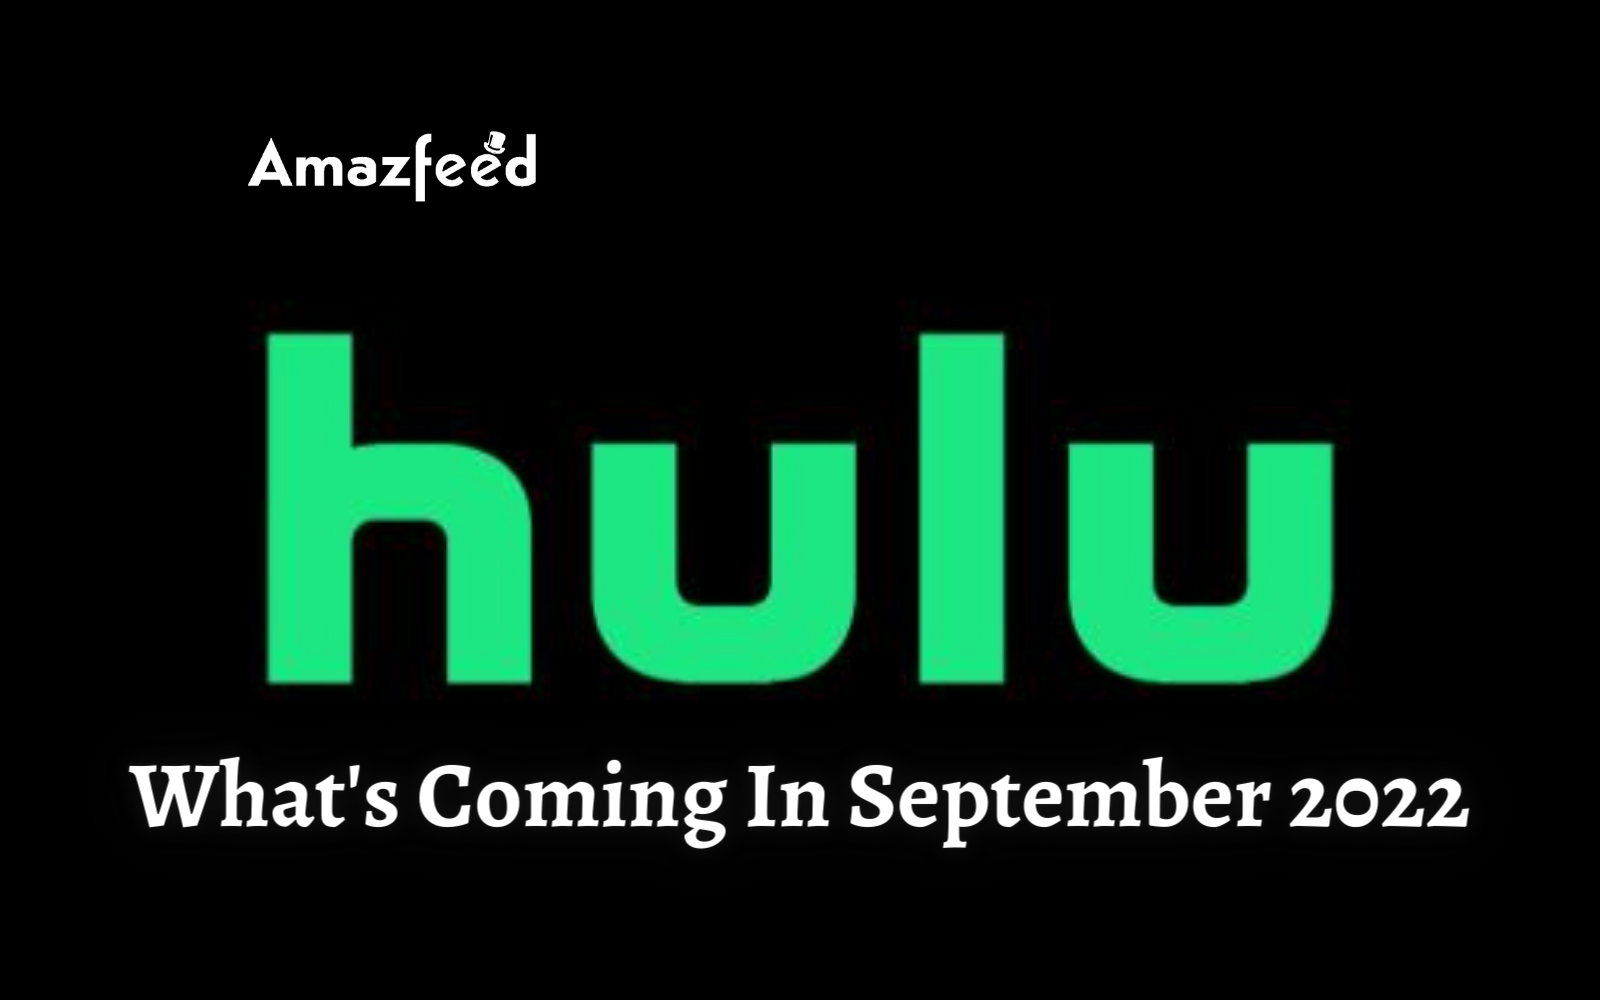 What's Coming In September 2022